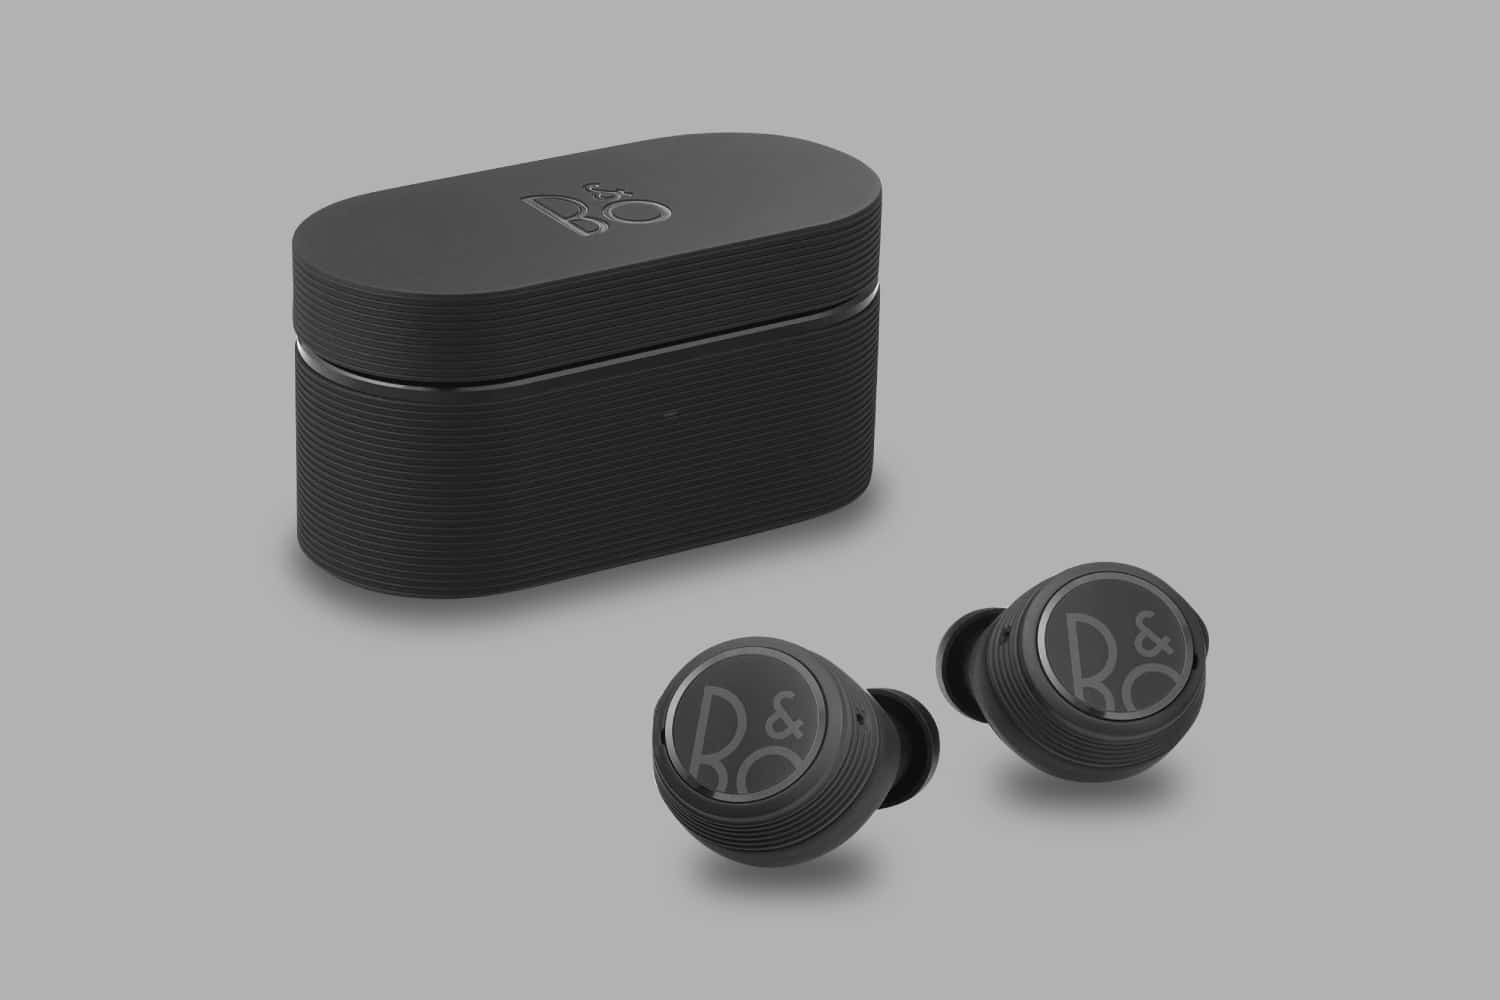 B&O Beoplay E8 Sport Review: Premium Sporty Earbuds